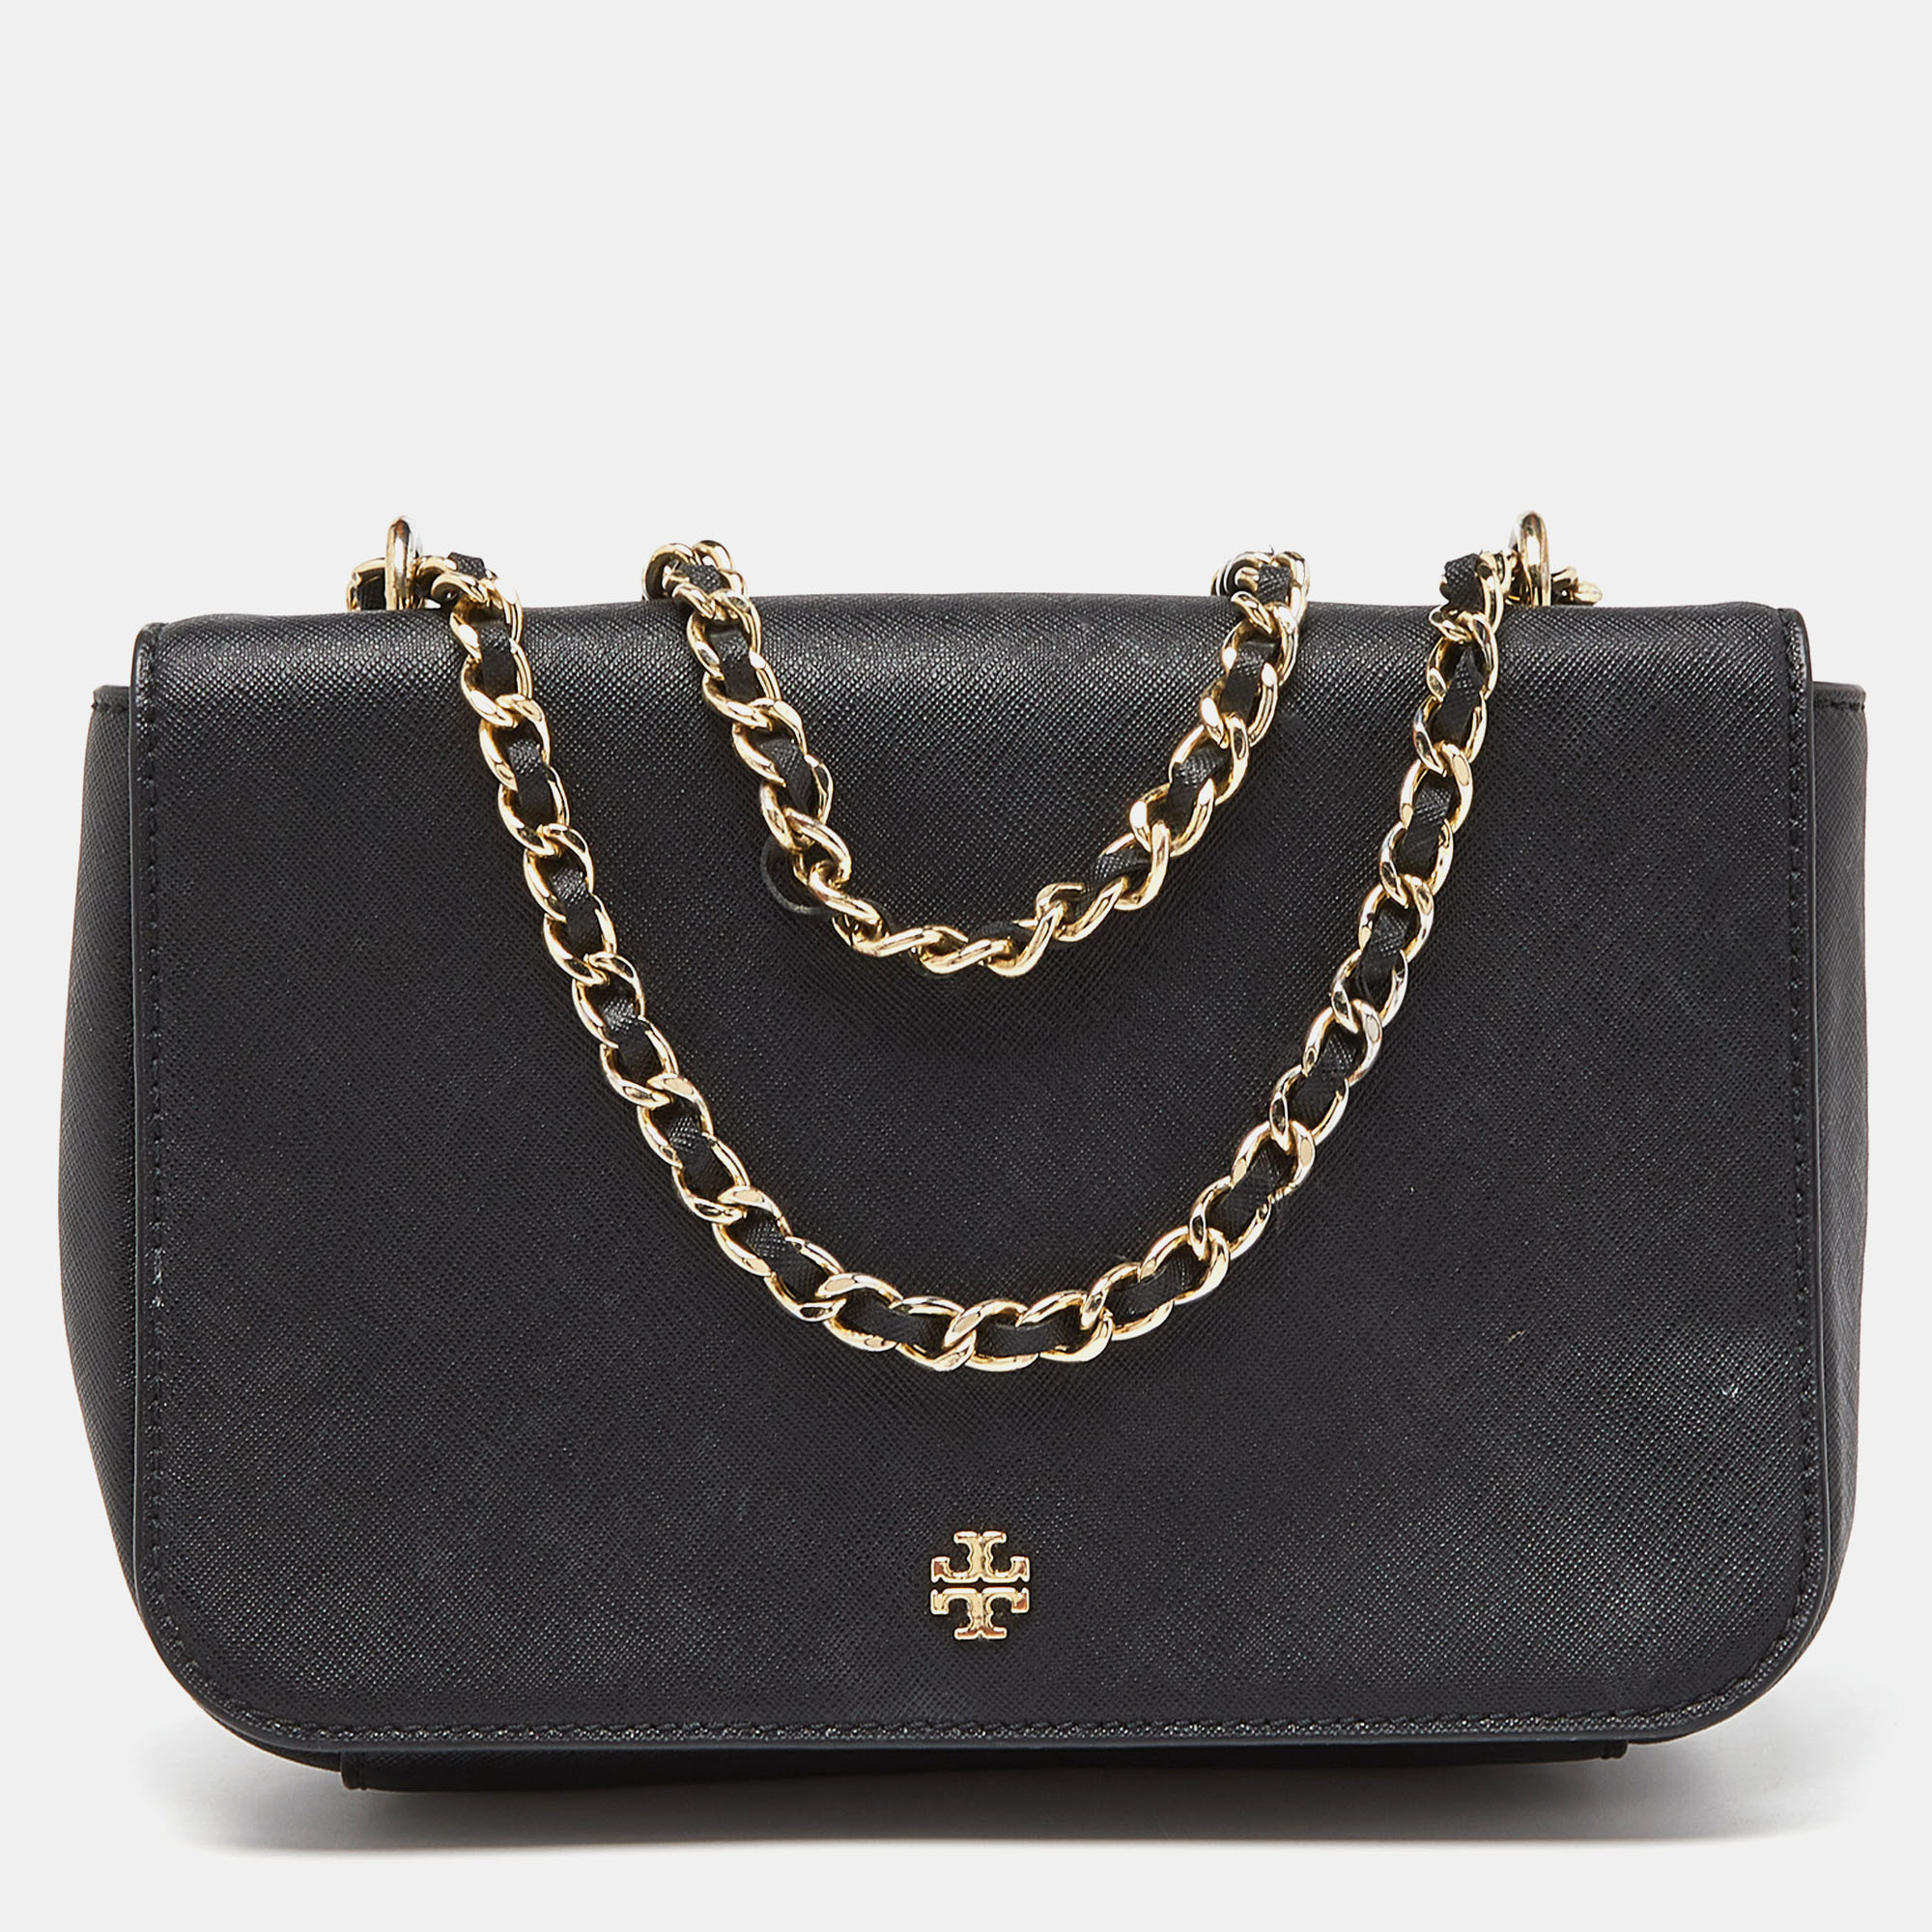 Pre-owned Tory Burch Black Leather Robinson Chain Crossbody Bag